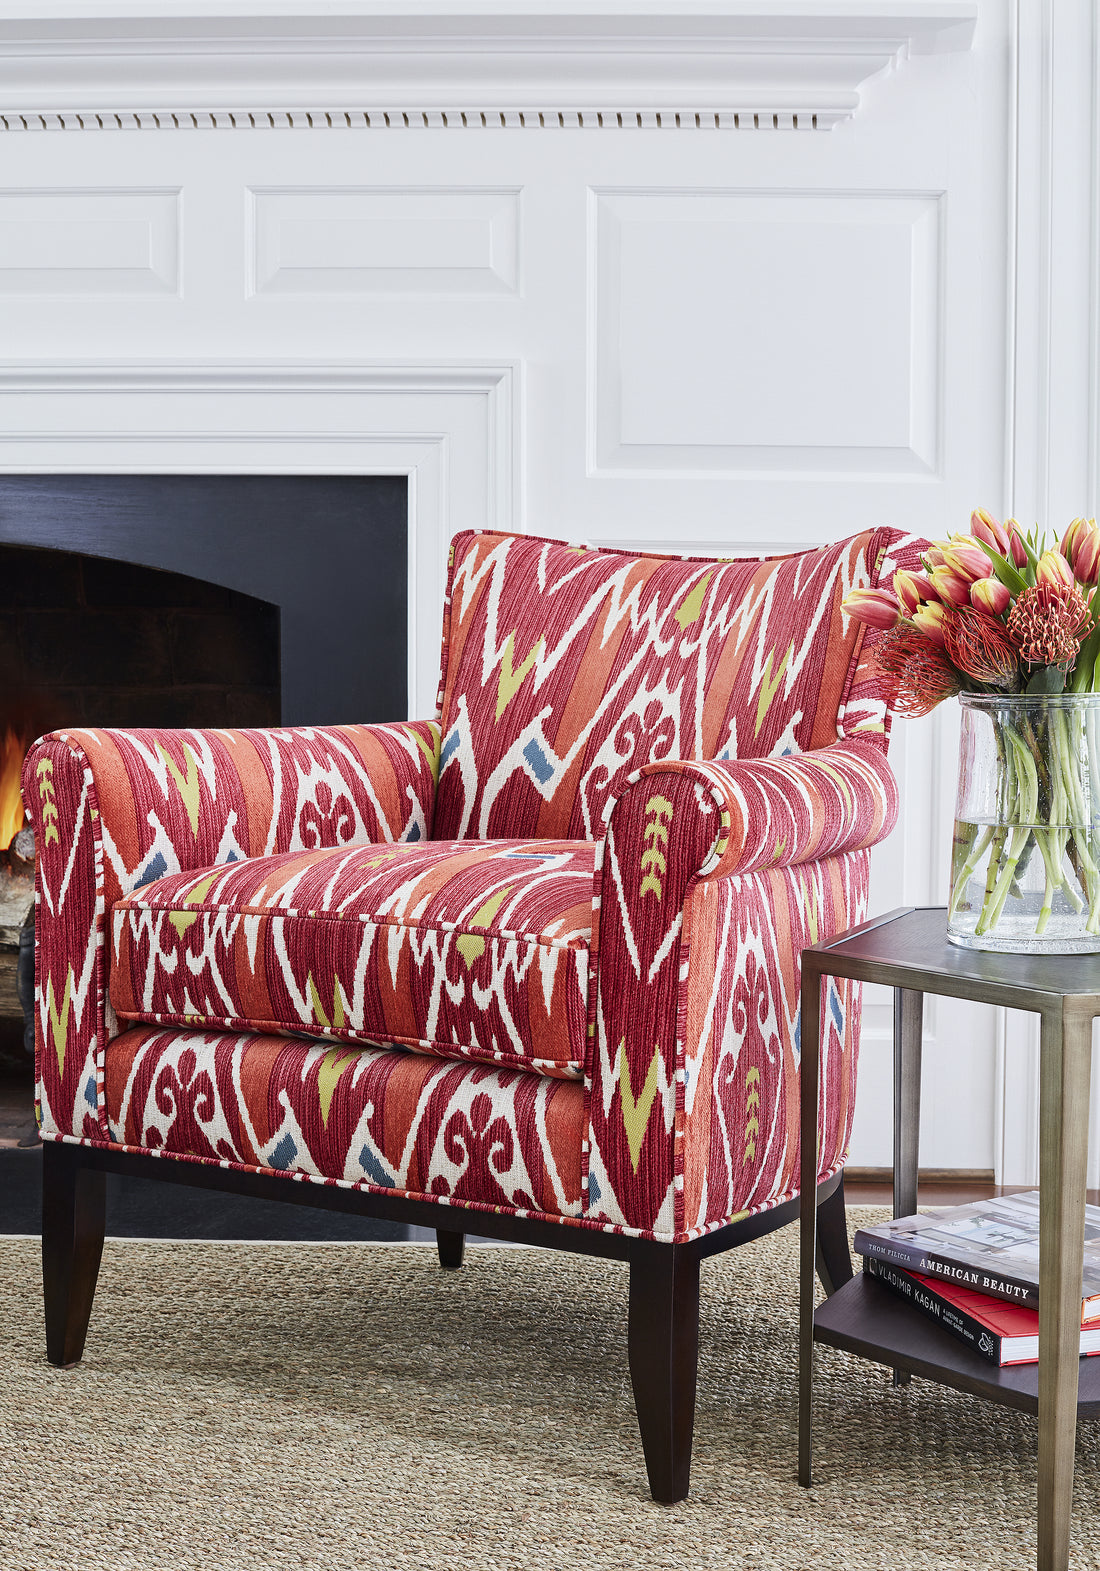 Winston Chair in Nomad woven fabric in red color - pattern number W73369 by Thibaut in the Nomad collection